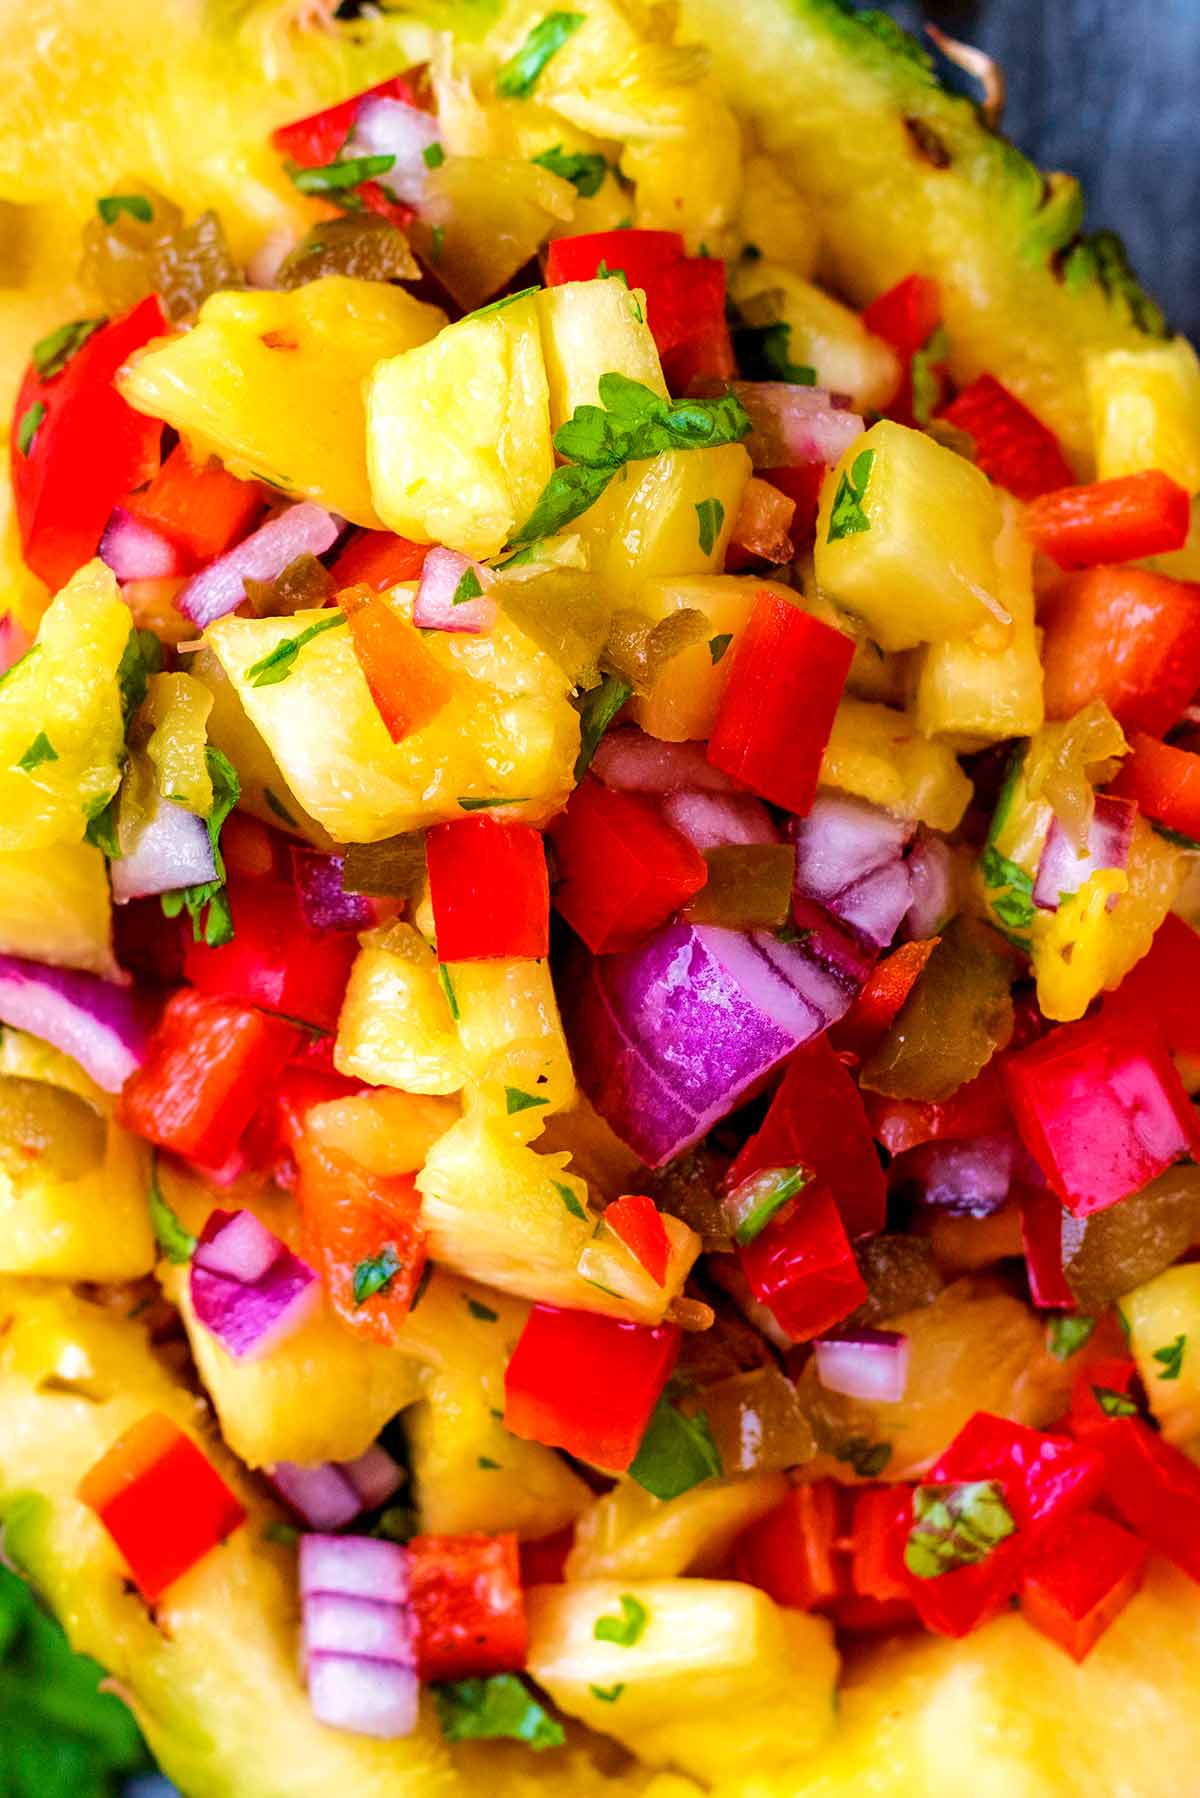 A salsa made up of pineapple, red onion, red bell pepper and chopped herbs.